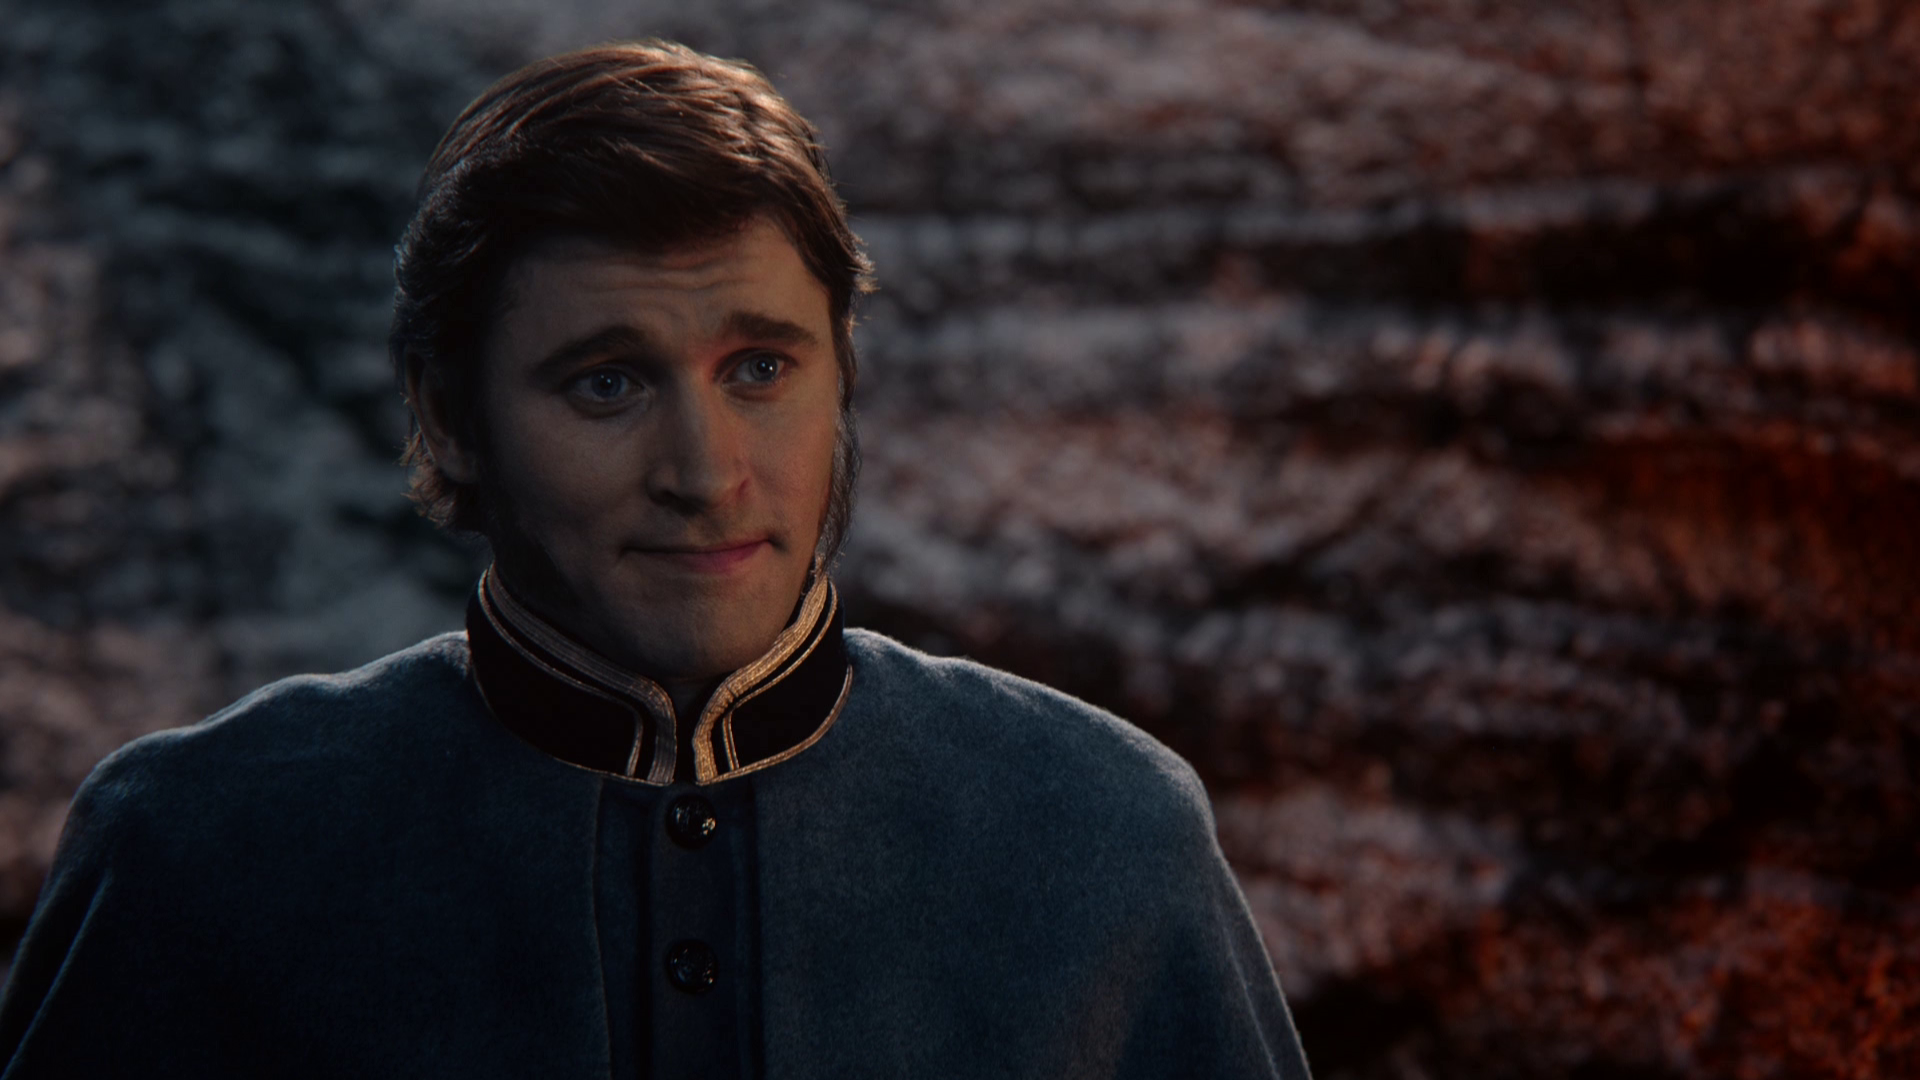 What Hans From 'Frozen' Can Teach Us About Life